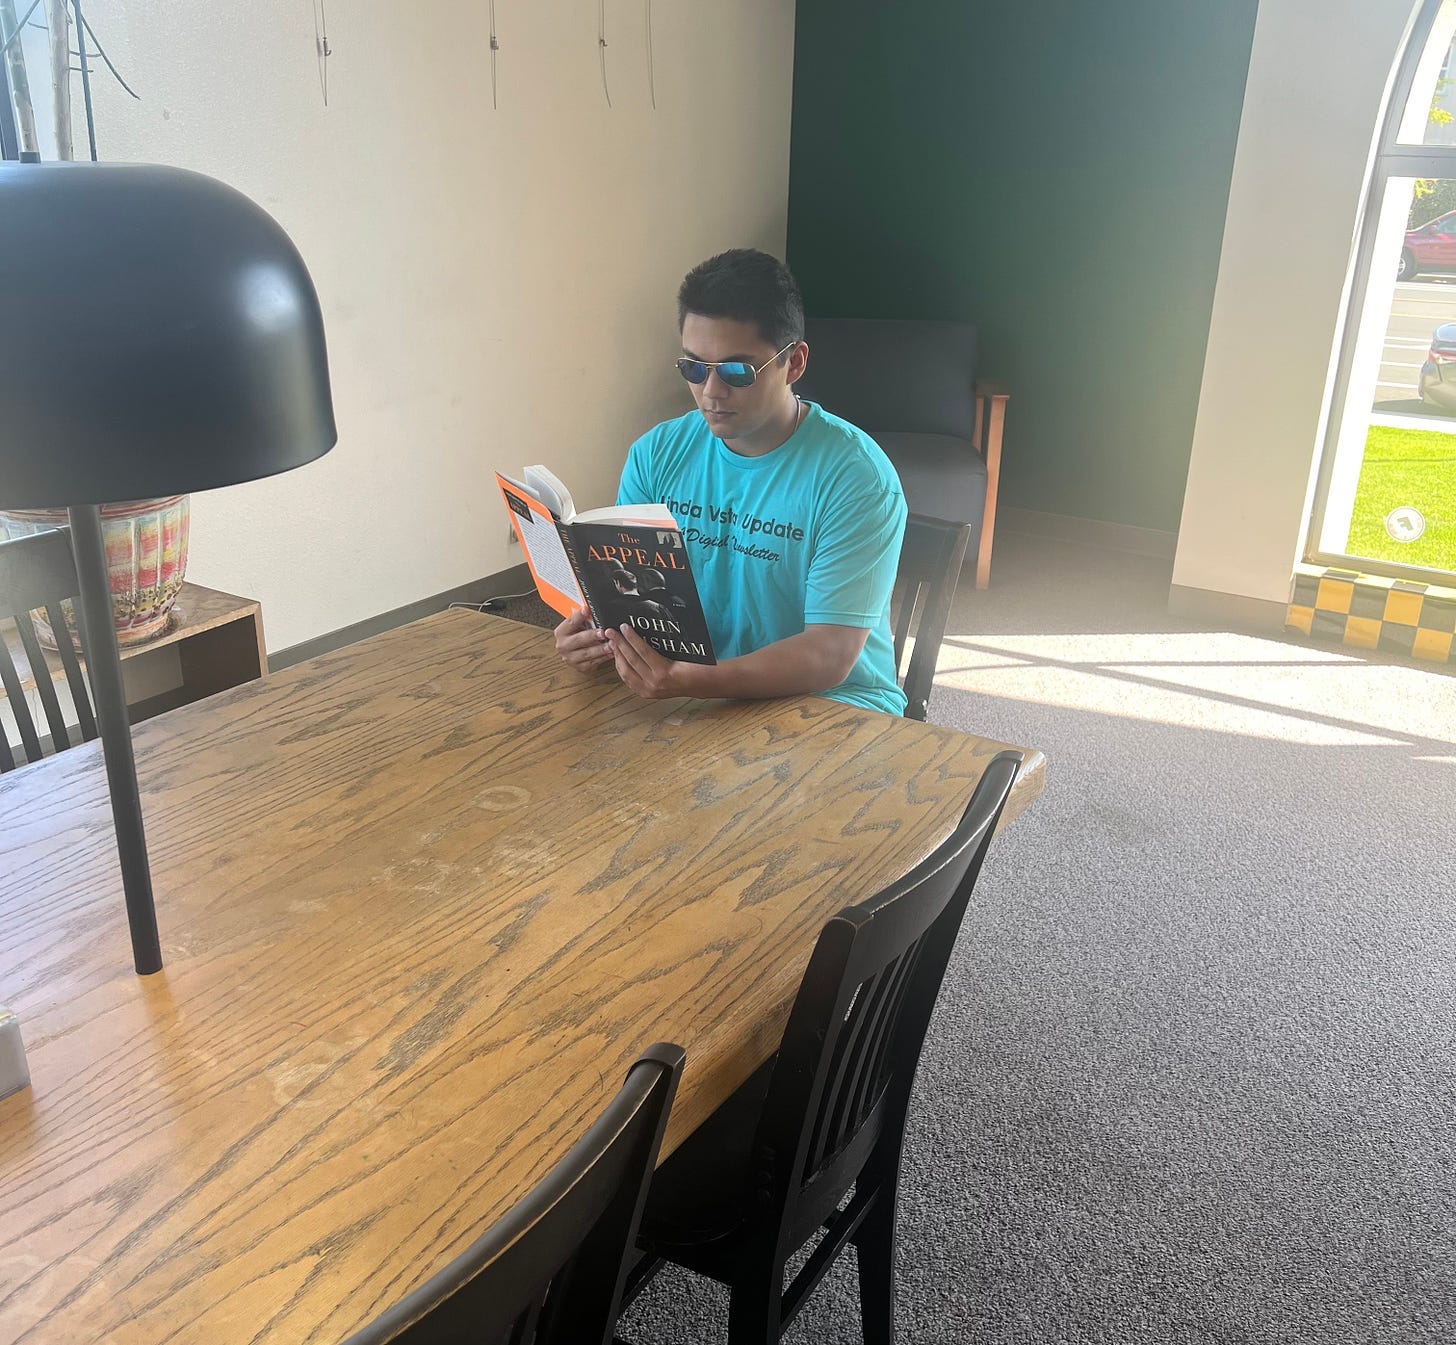 A person sitting at a table reading a book

Description automatically generated